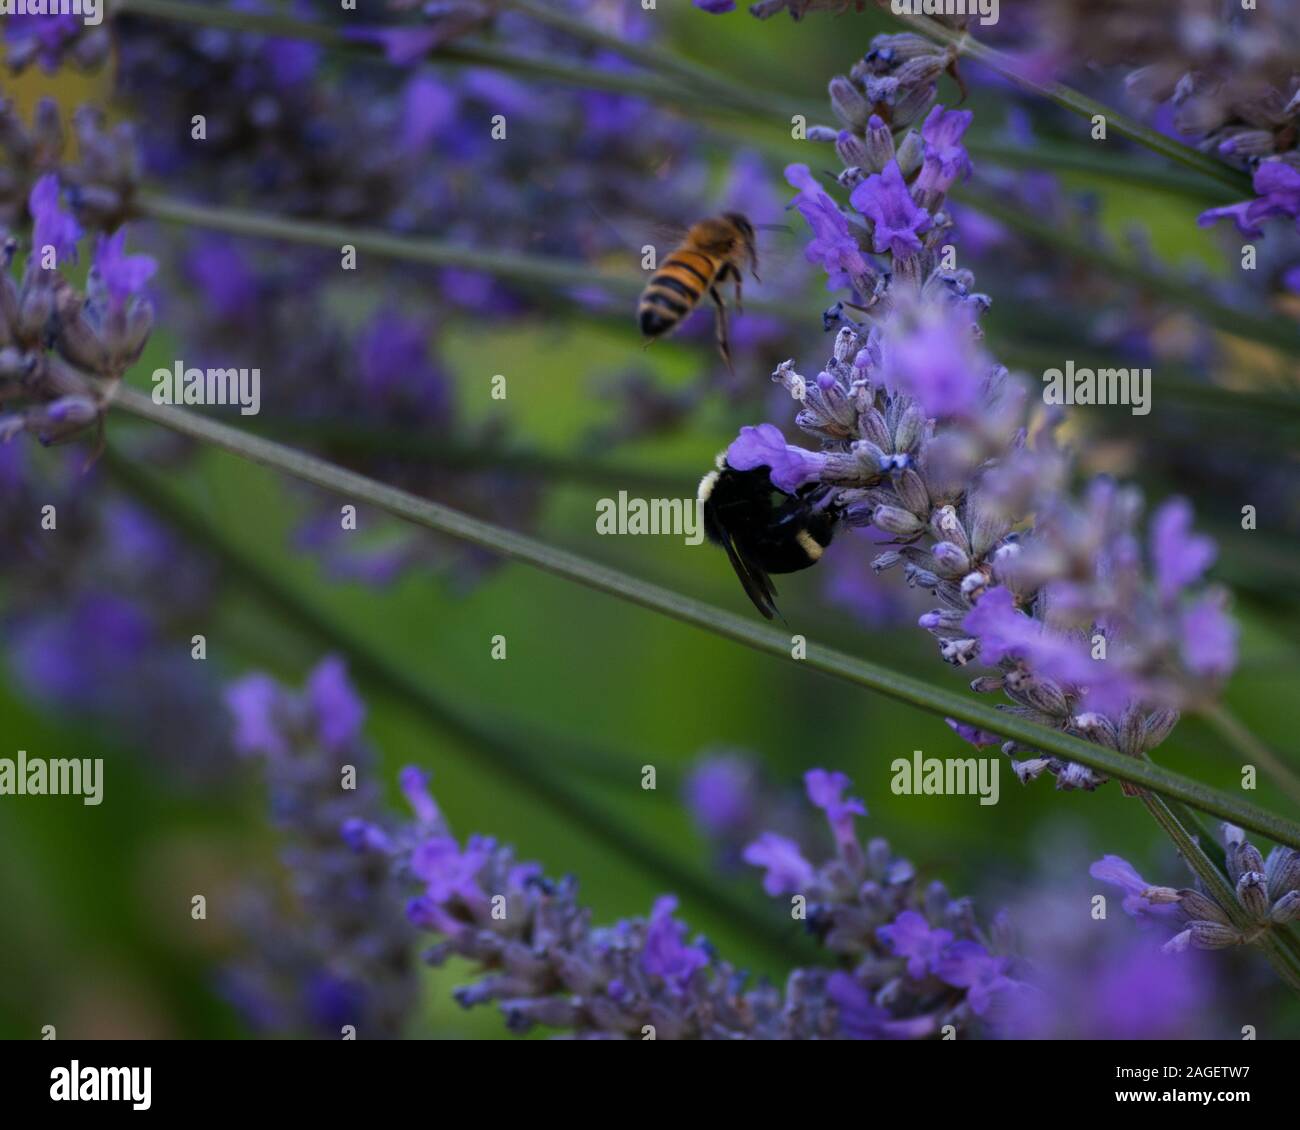 Bees in search of nectar from lavender flowers. Stock Photo